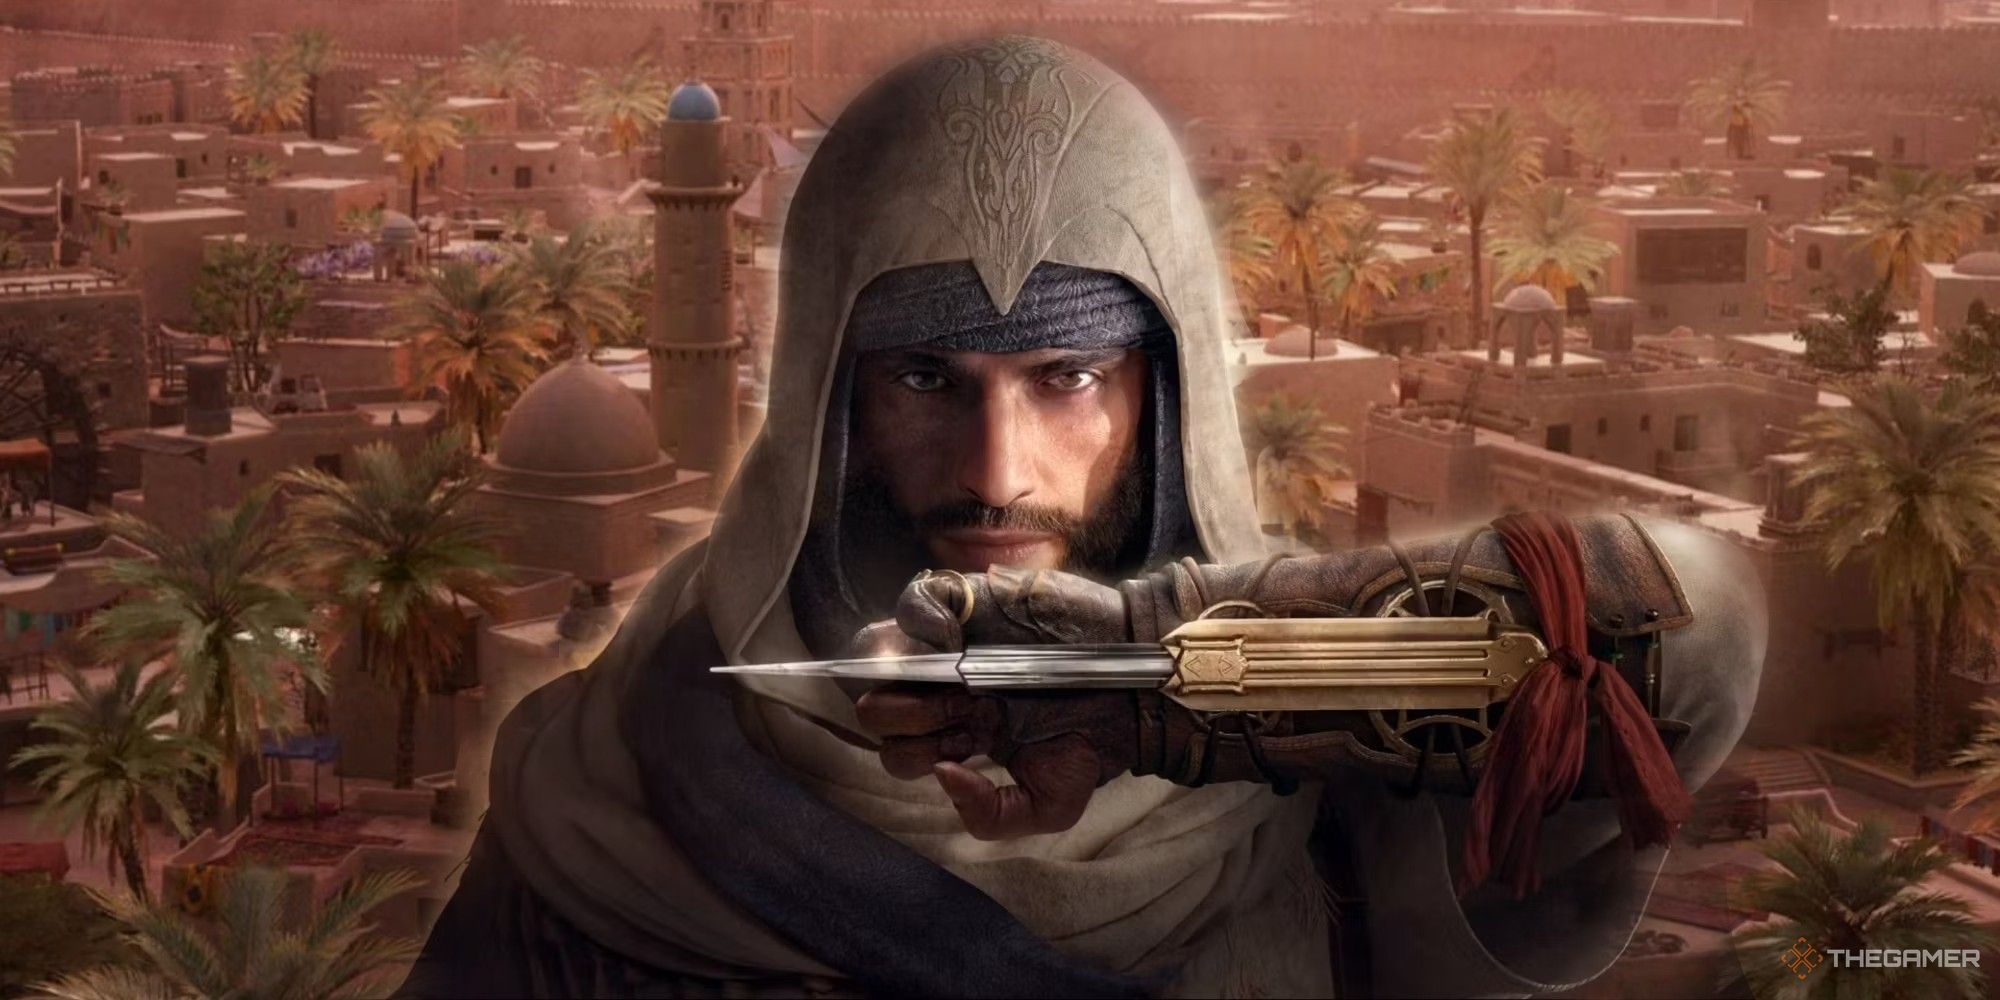 Where Does Assassin's Creed Mirage Take Place?